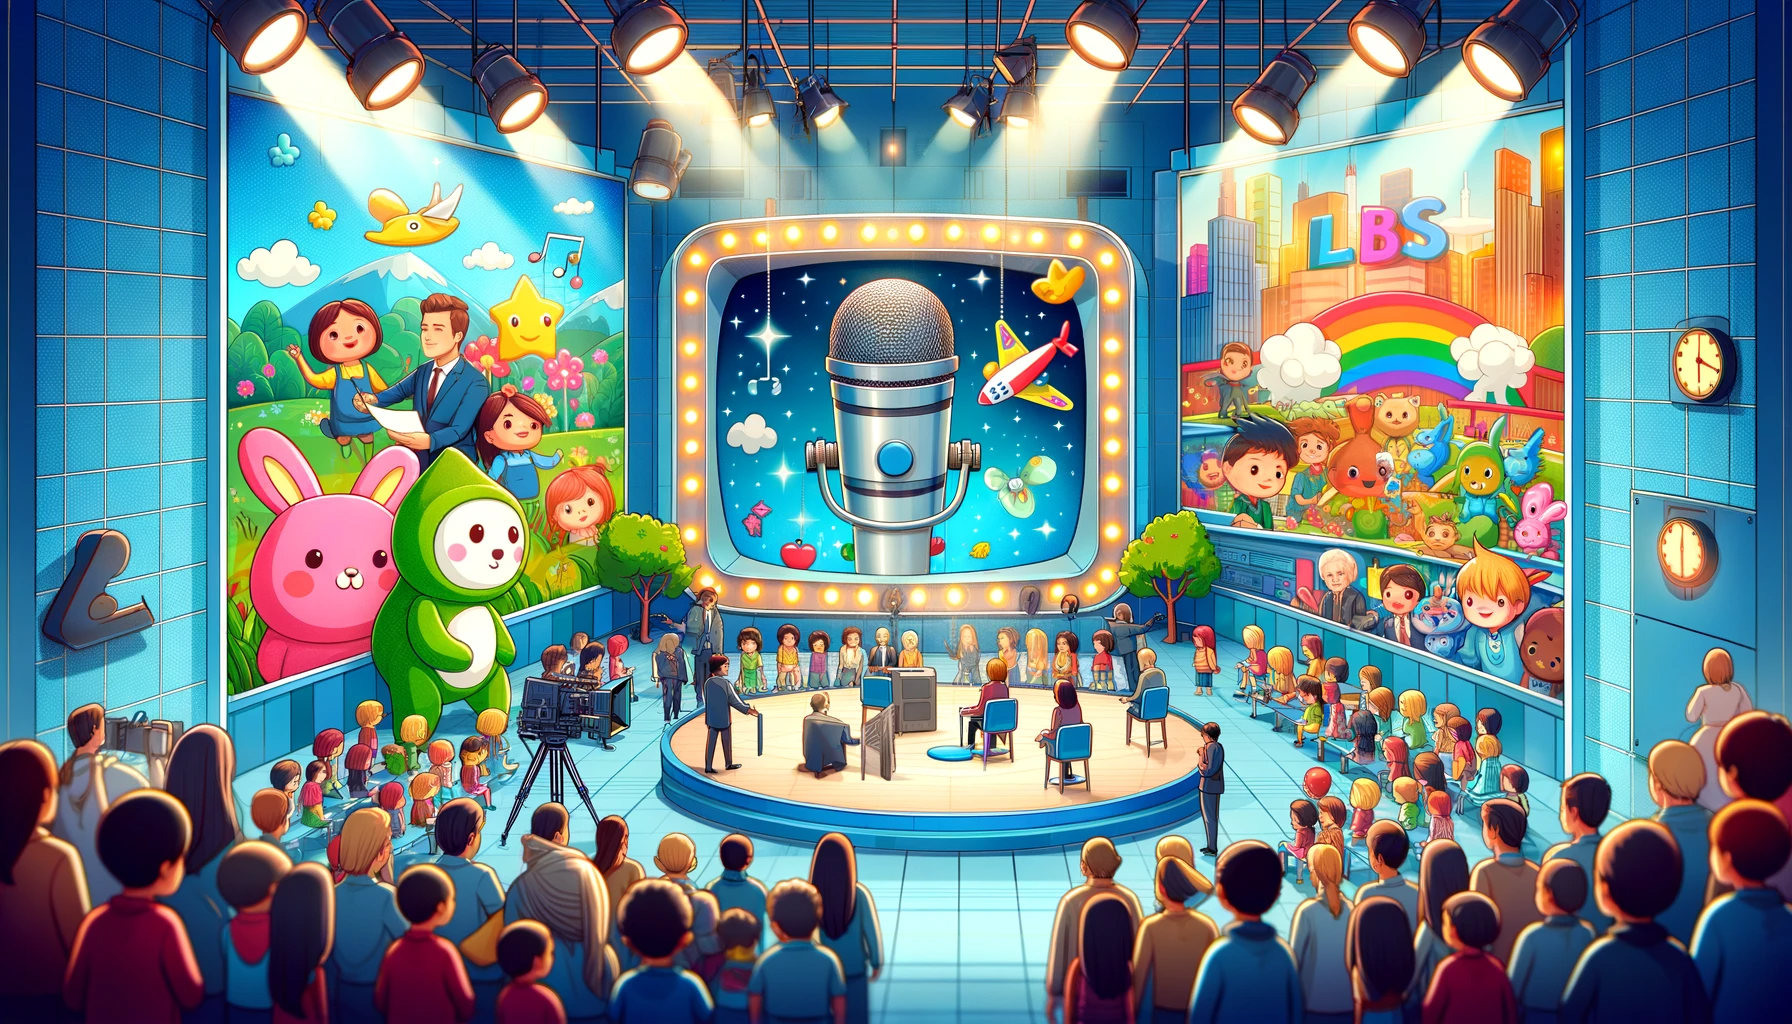 Broadcasting Educational Children’s Shows